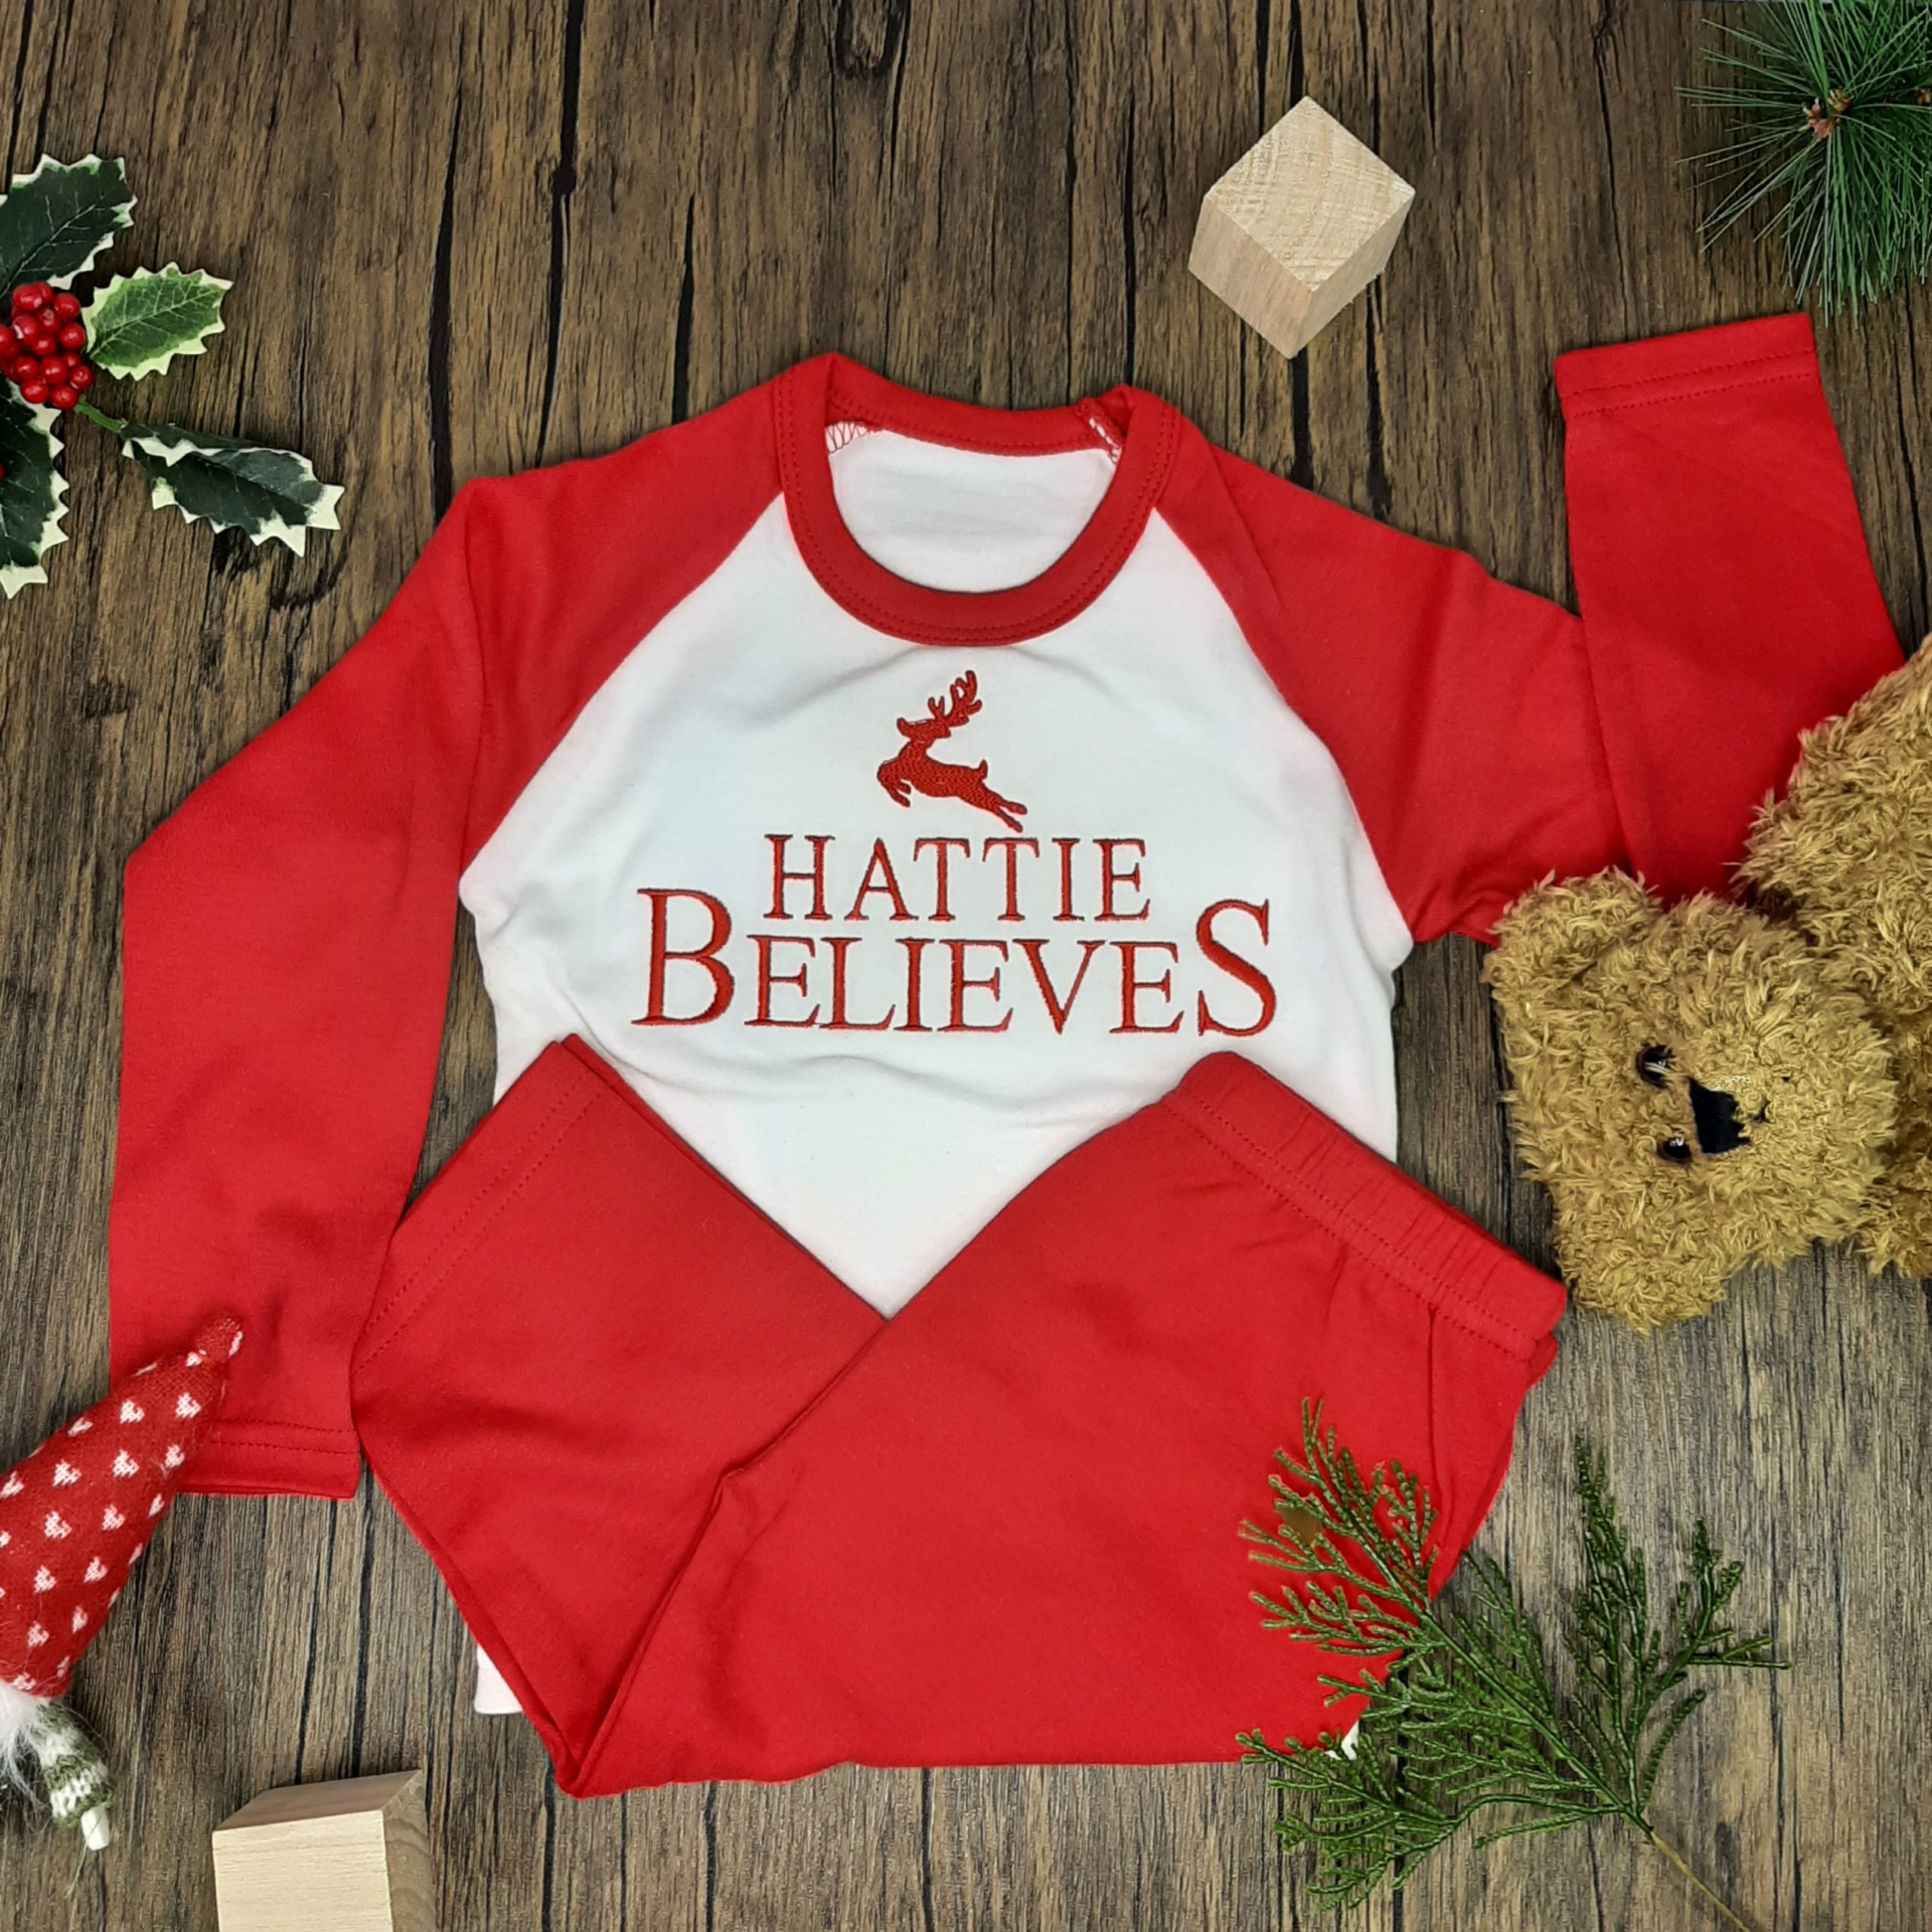 Believes Christmas PJs in red and white for christmas professionally embroidered personalisation. laid